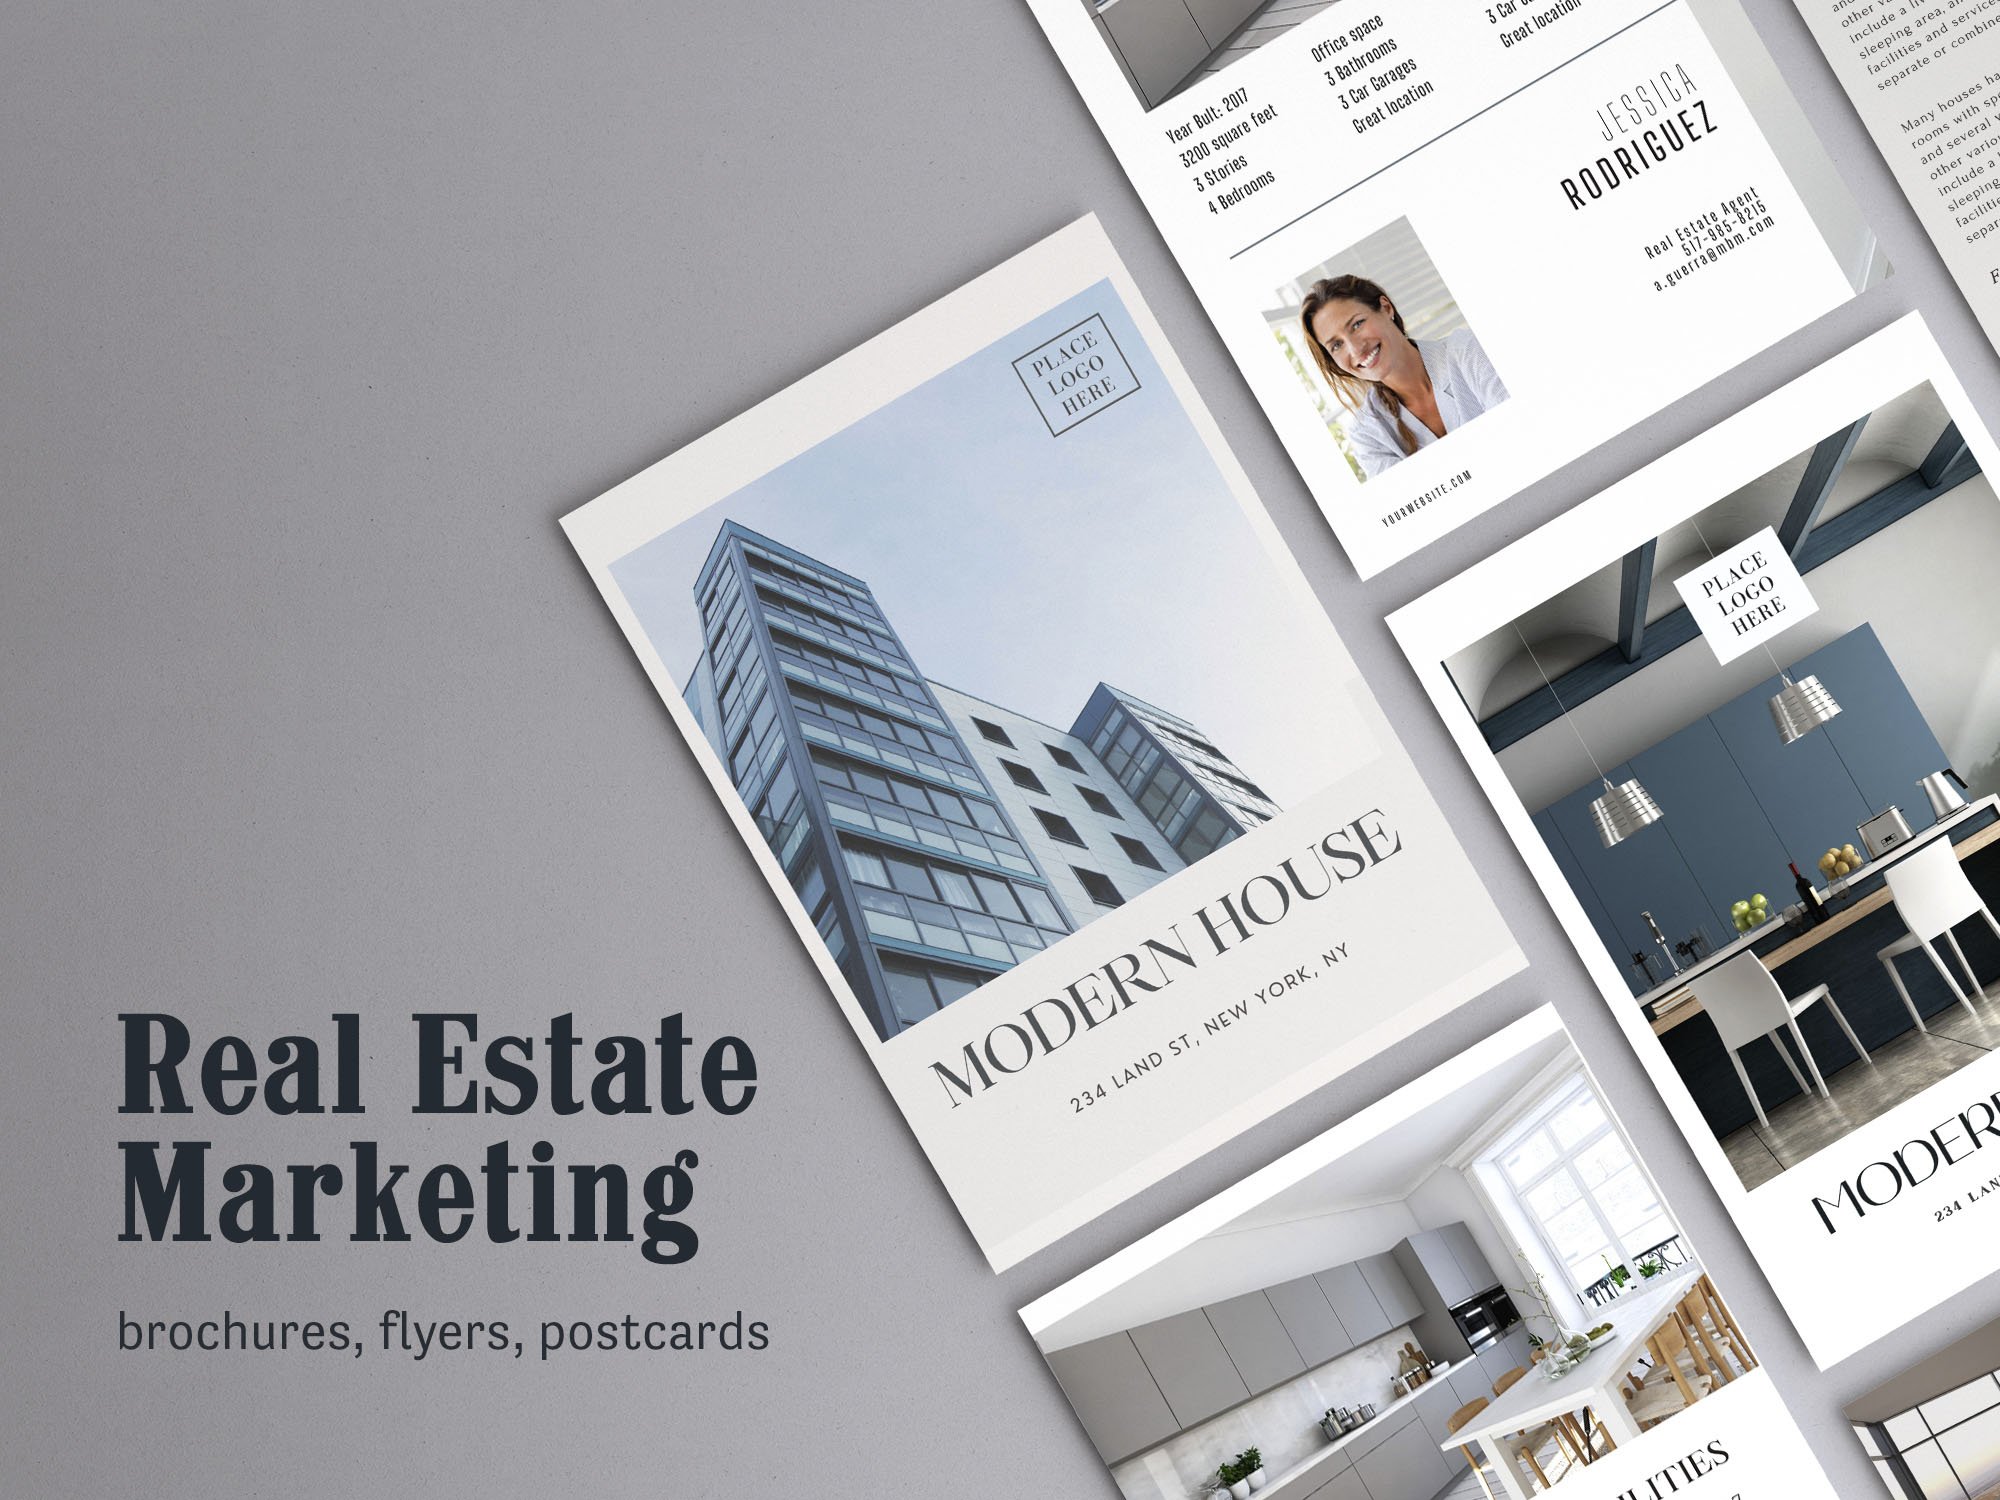 Real Estate Flyers & Brochures cover image.